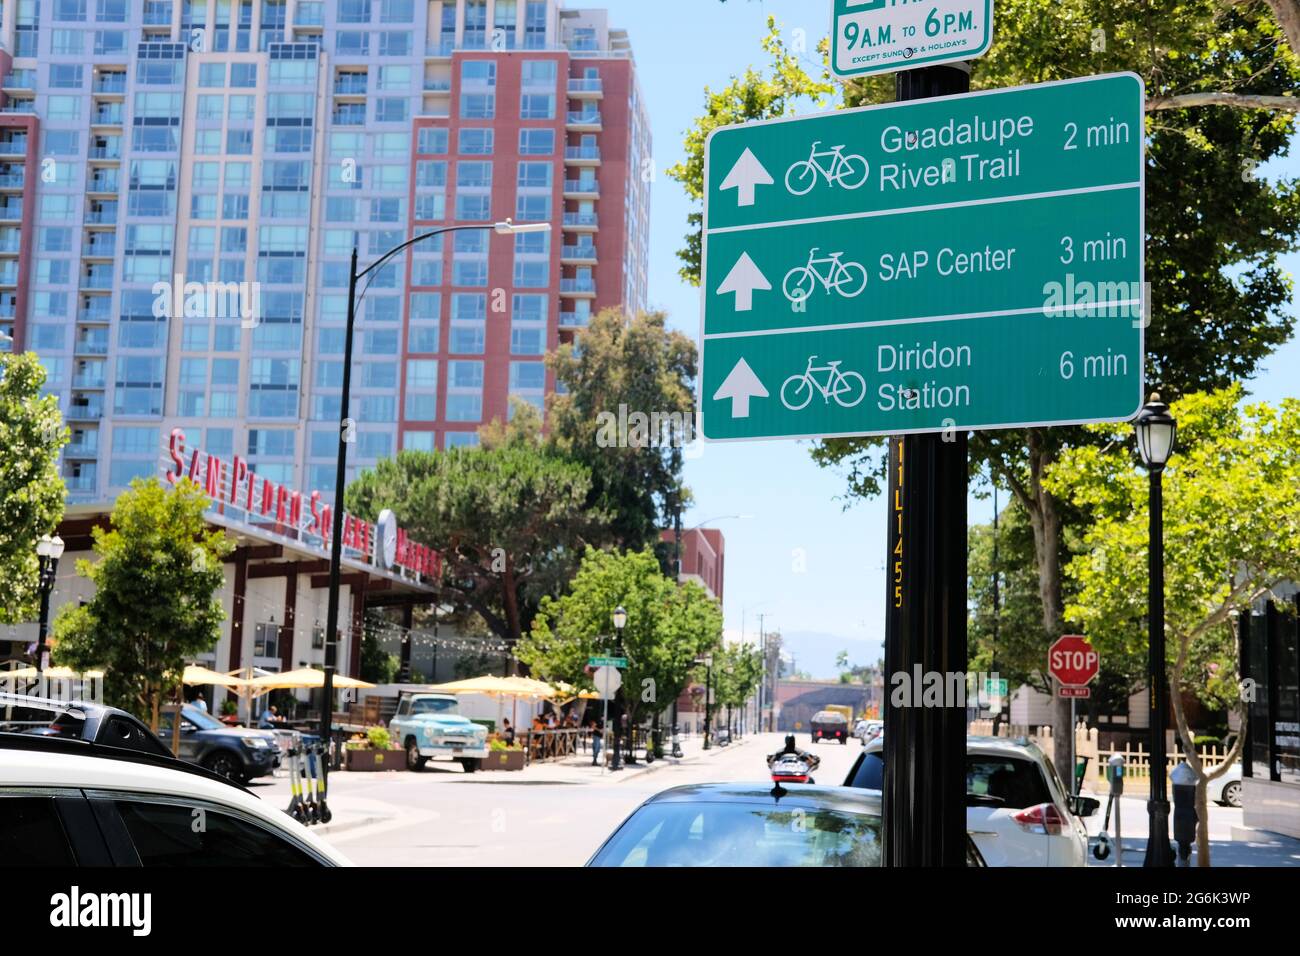 Bike direction sign in downtown San Jose, California to SAP Center, Guadalupe River Trail, and Diridon Station with distance measured in minutes. Stock Photo